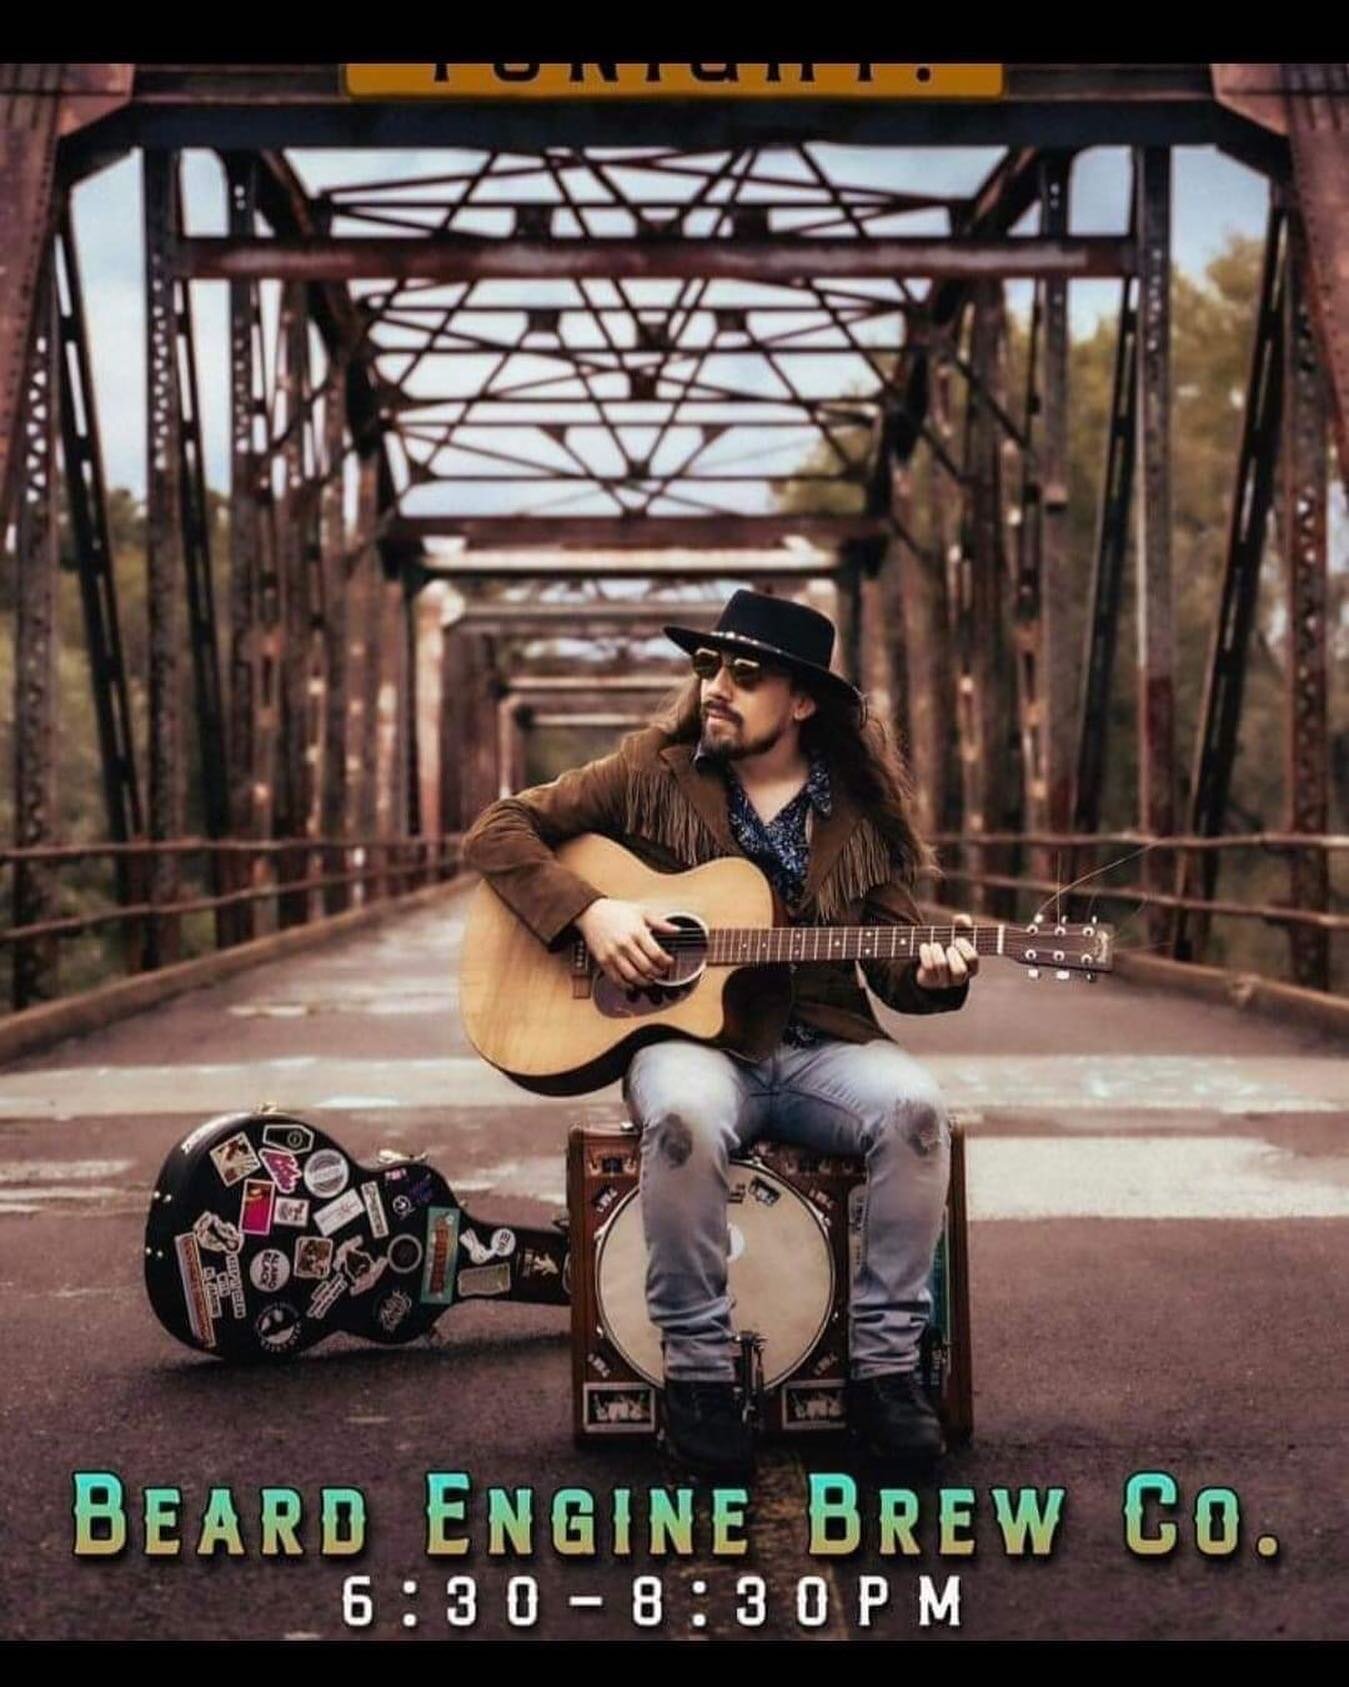 🚨Tonight Friends!! 🚨

Justin Larkin is a musician &amp; entertainer from Springfield, Missouri. Having spent the last 15+ years performing all across America with various musical groups like rocknroll band Mood Ring Circus, as well as a one-man ban